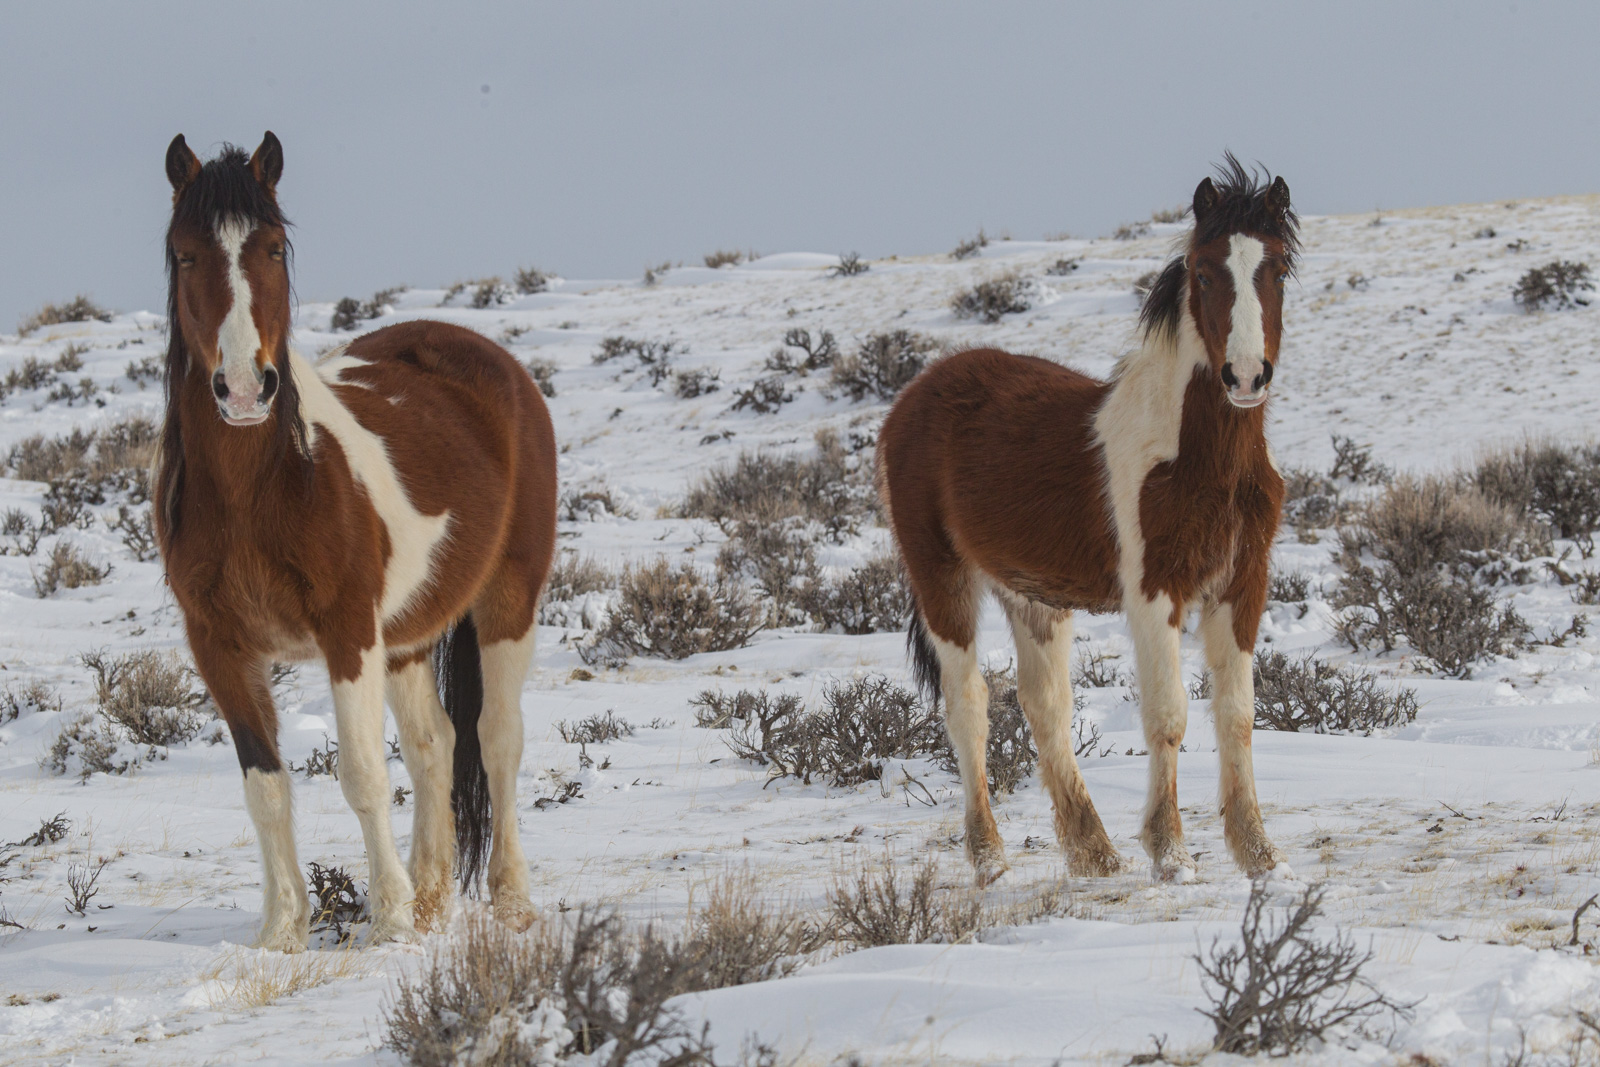 Wild Horses in Winter. Paint Pair a Fine Art Limited Edition Prints by Jess Lee. Bring home the beauty Order yours Today.